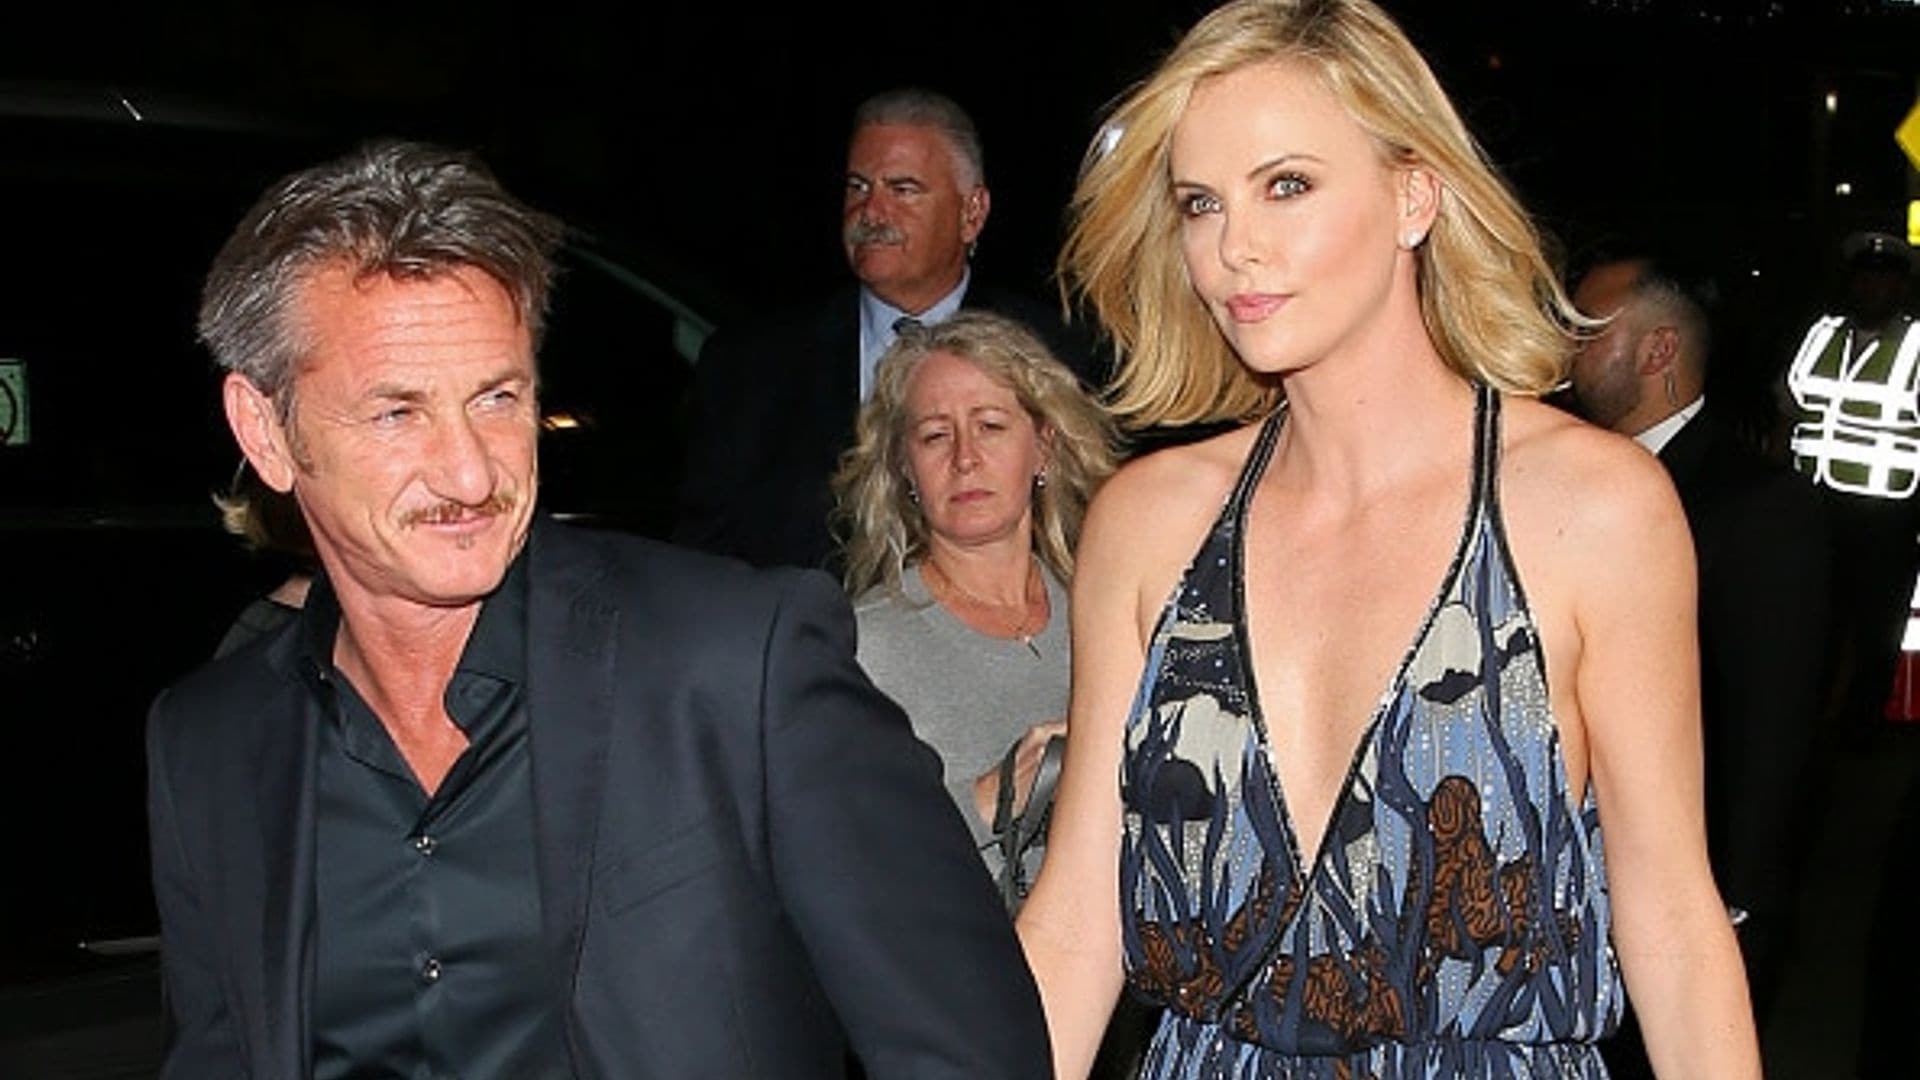 Sean Penn and Charlize Theron are big 'Bachelor' fans